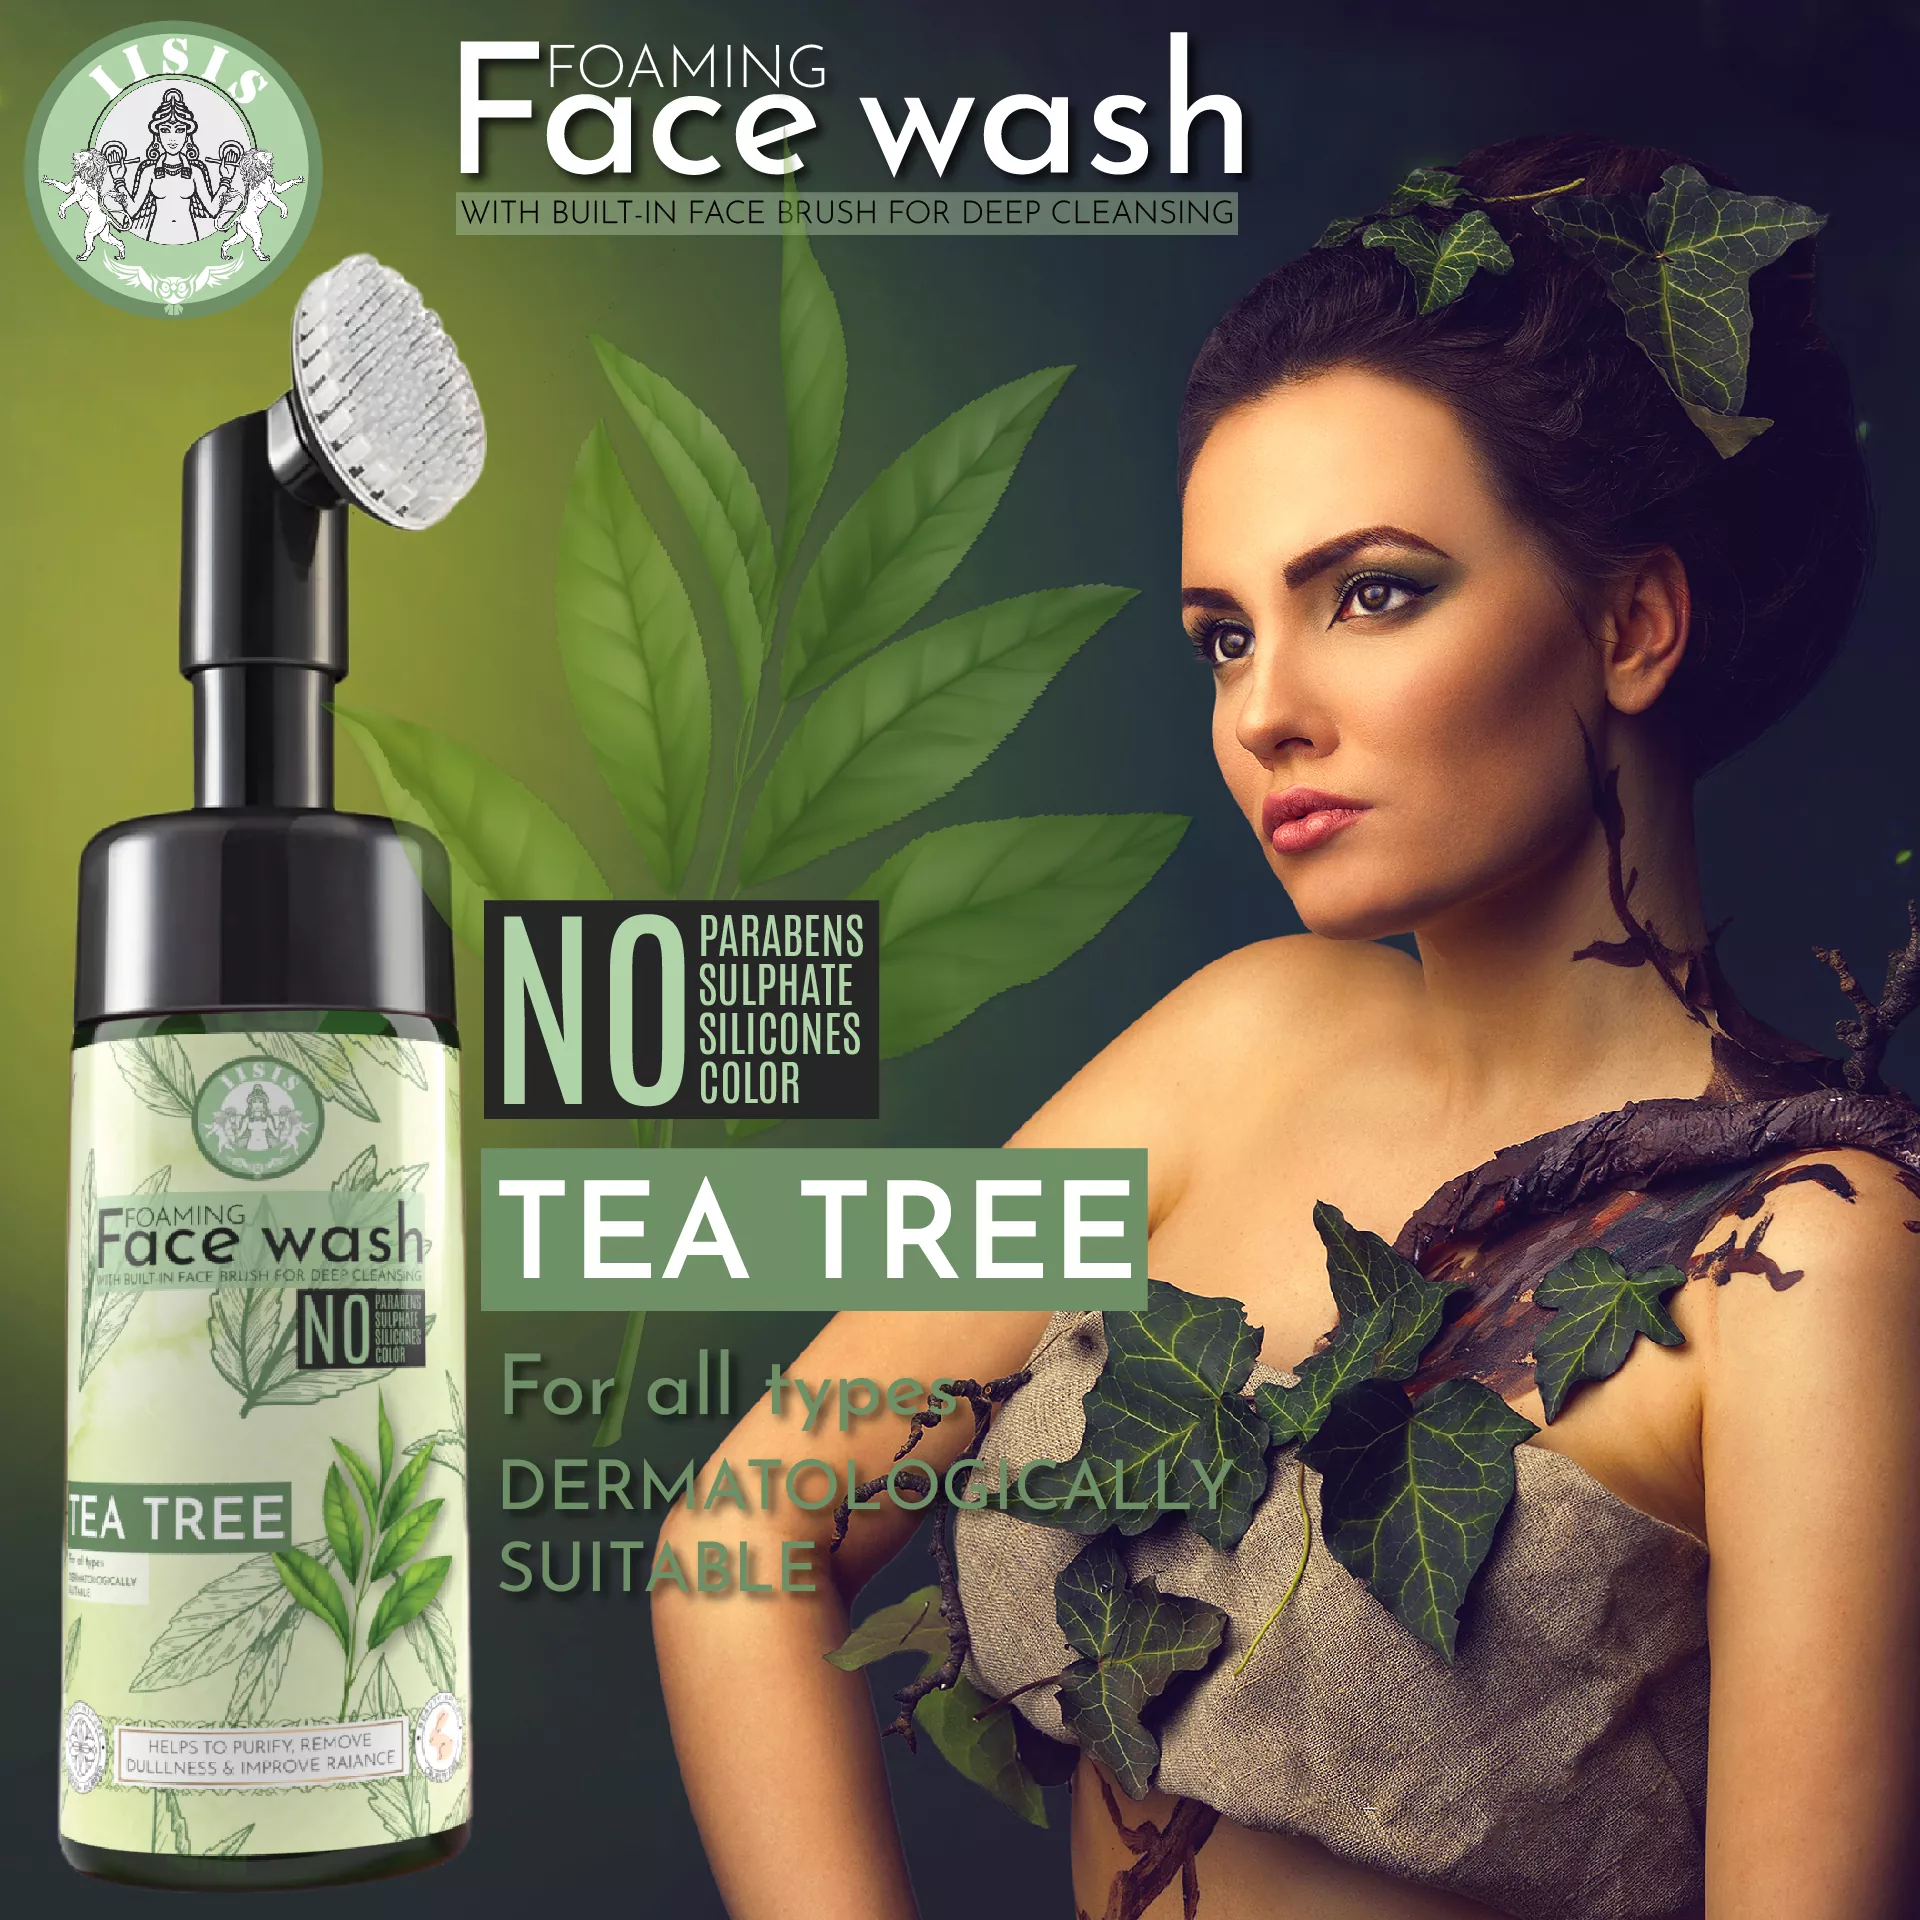 Tea Tree Foaming Face Wash With Built-In Face Brush (150ml)